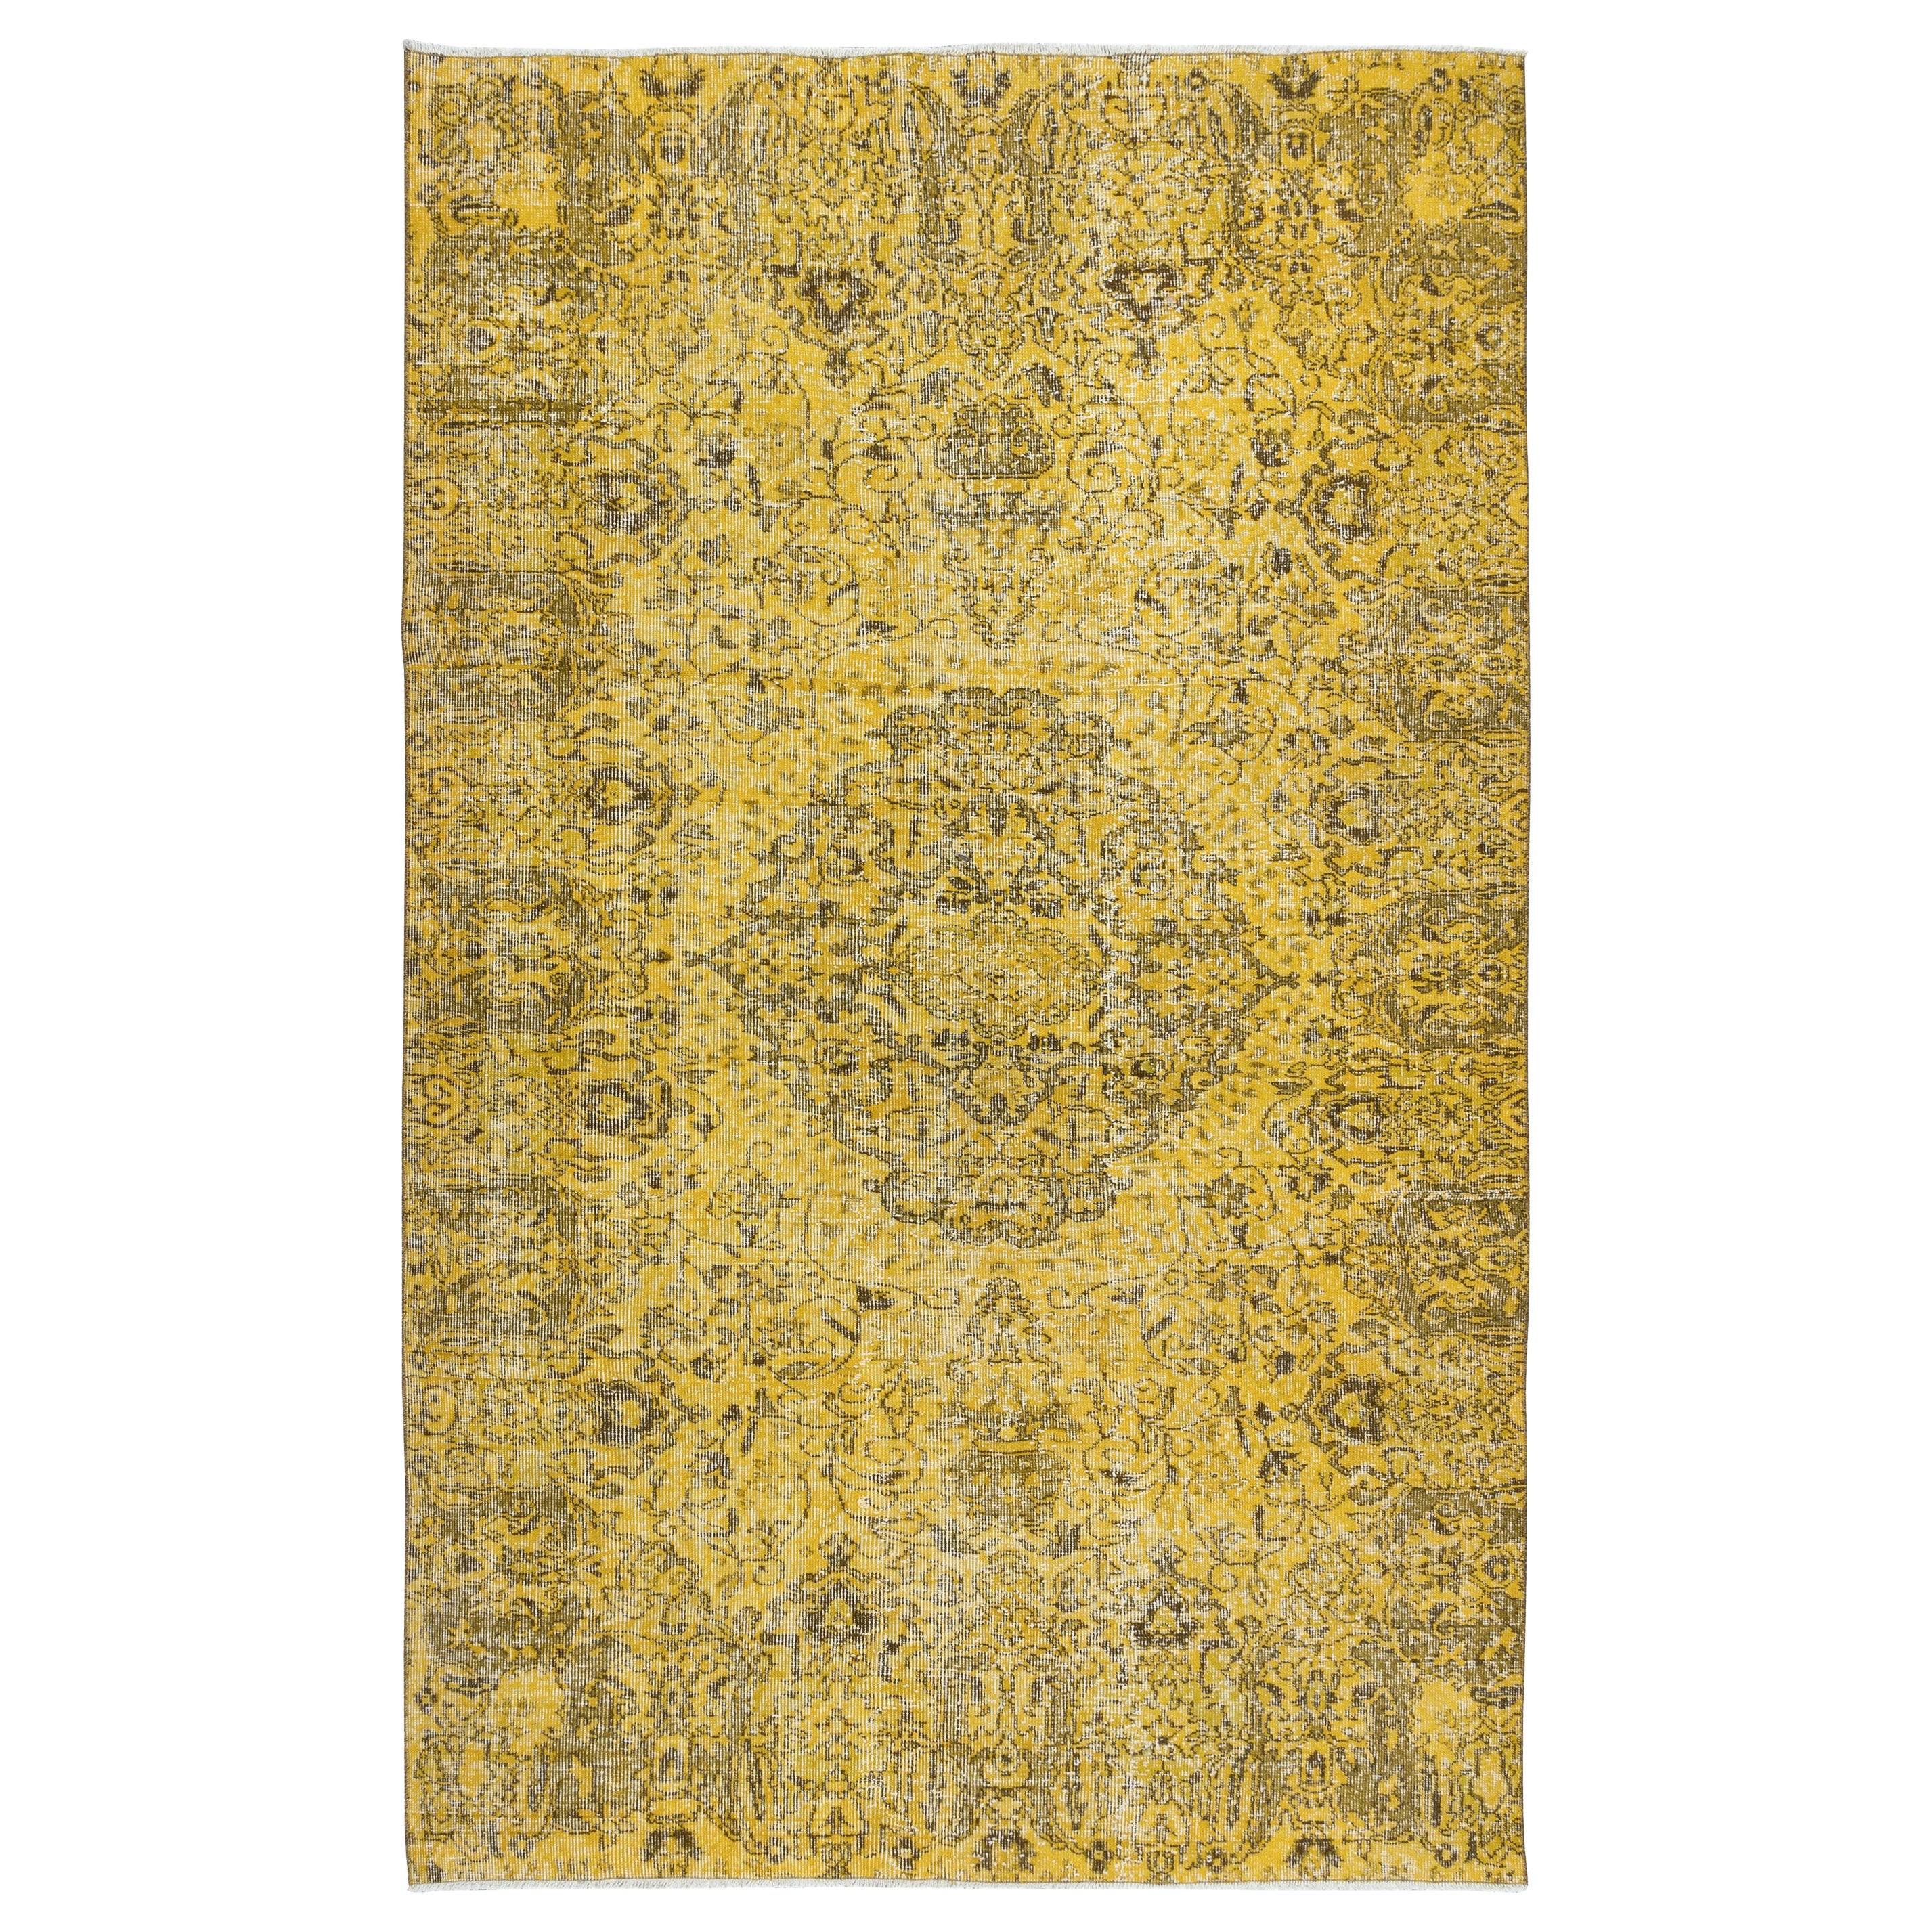 5.4x8.6 Ft Decorative Handmade Turkish Area Rug in Yellow with Medallion Design For Sale